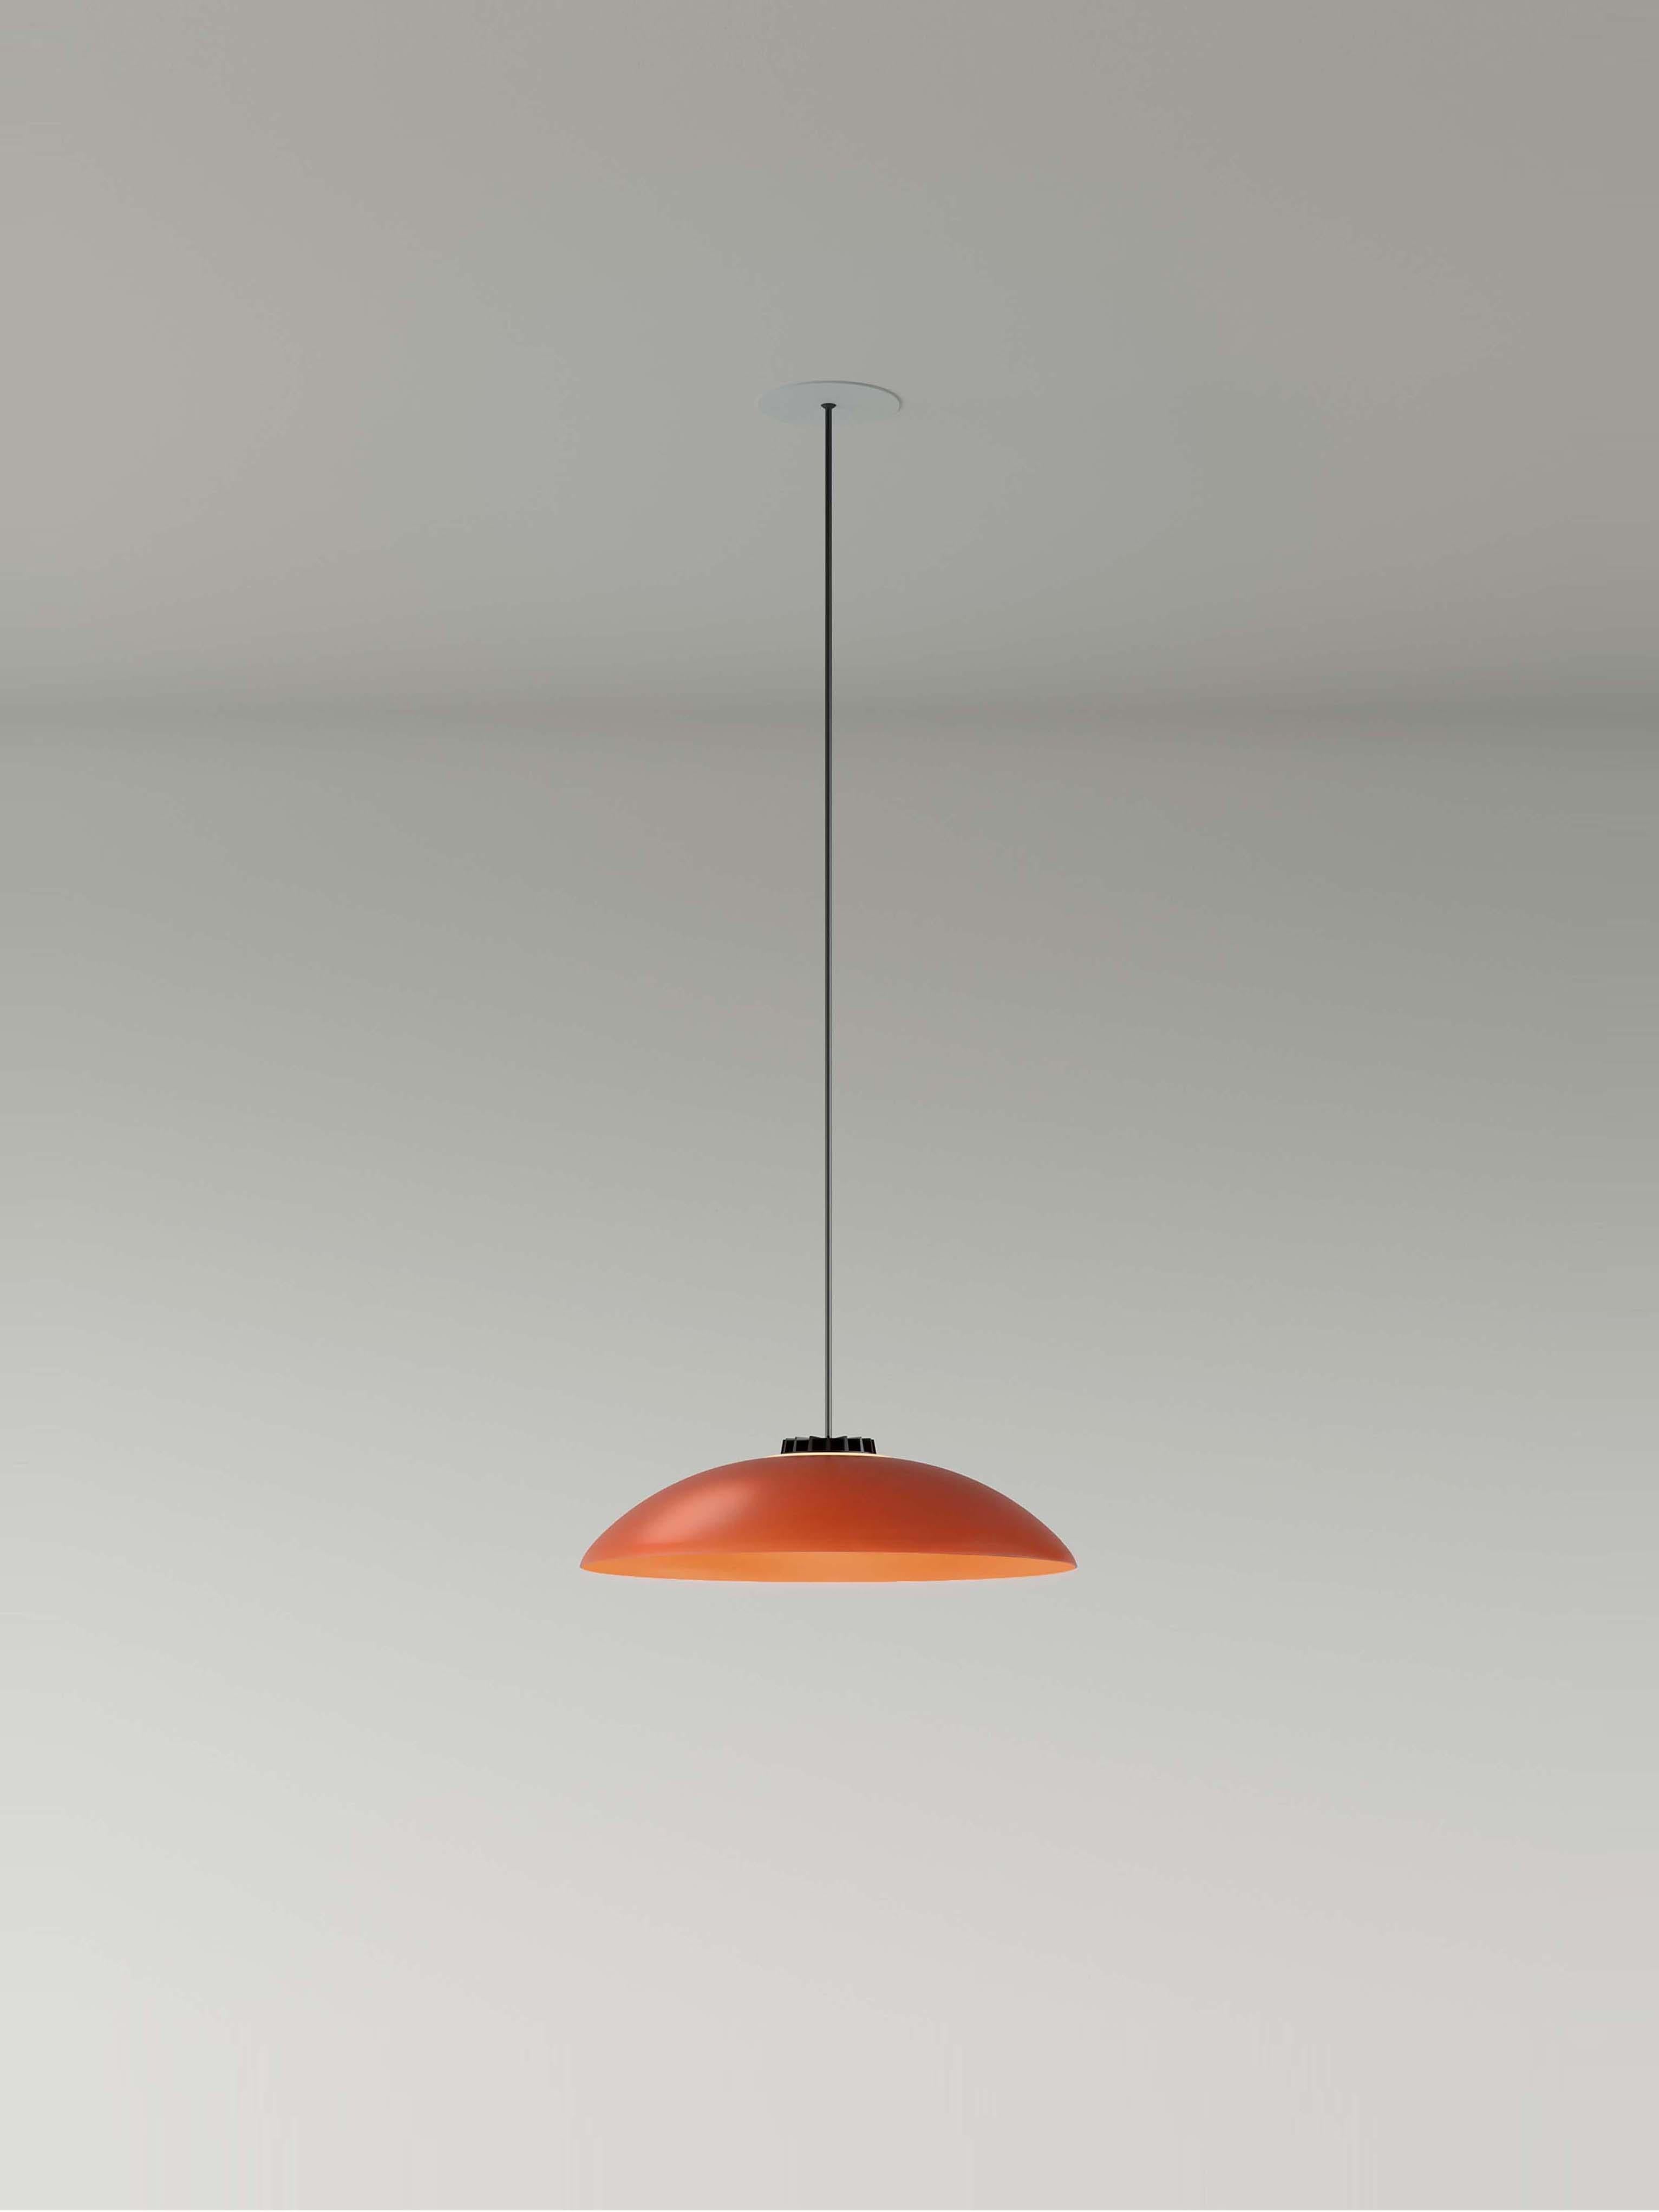 Small red headhat plate pendant lamp by Santa & Cole
Dimensions: d 35 x h 9 cm
Materials: Metal.
Cable lenght: 3mts.
Available in other colors and sizes. Available in 2 cable lengths: 3mts, 8mts.
Available in 2 canopy colors: black or